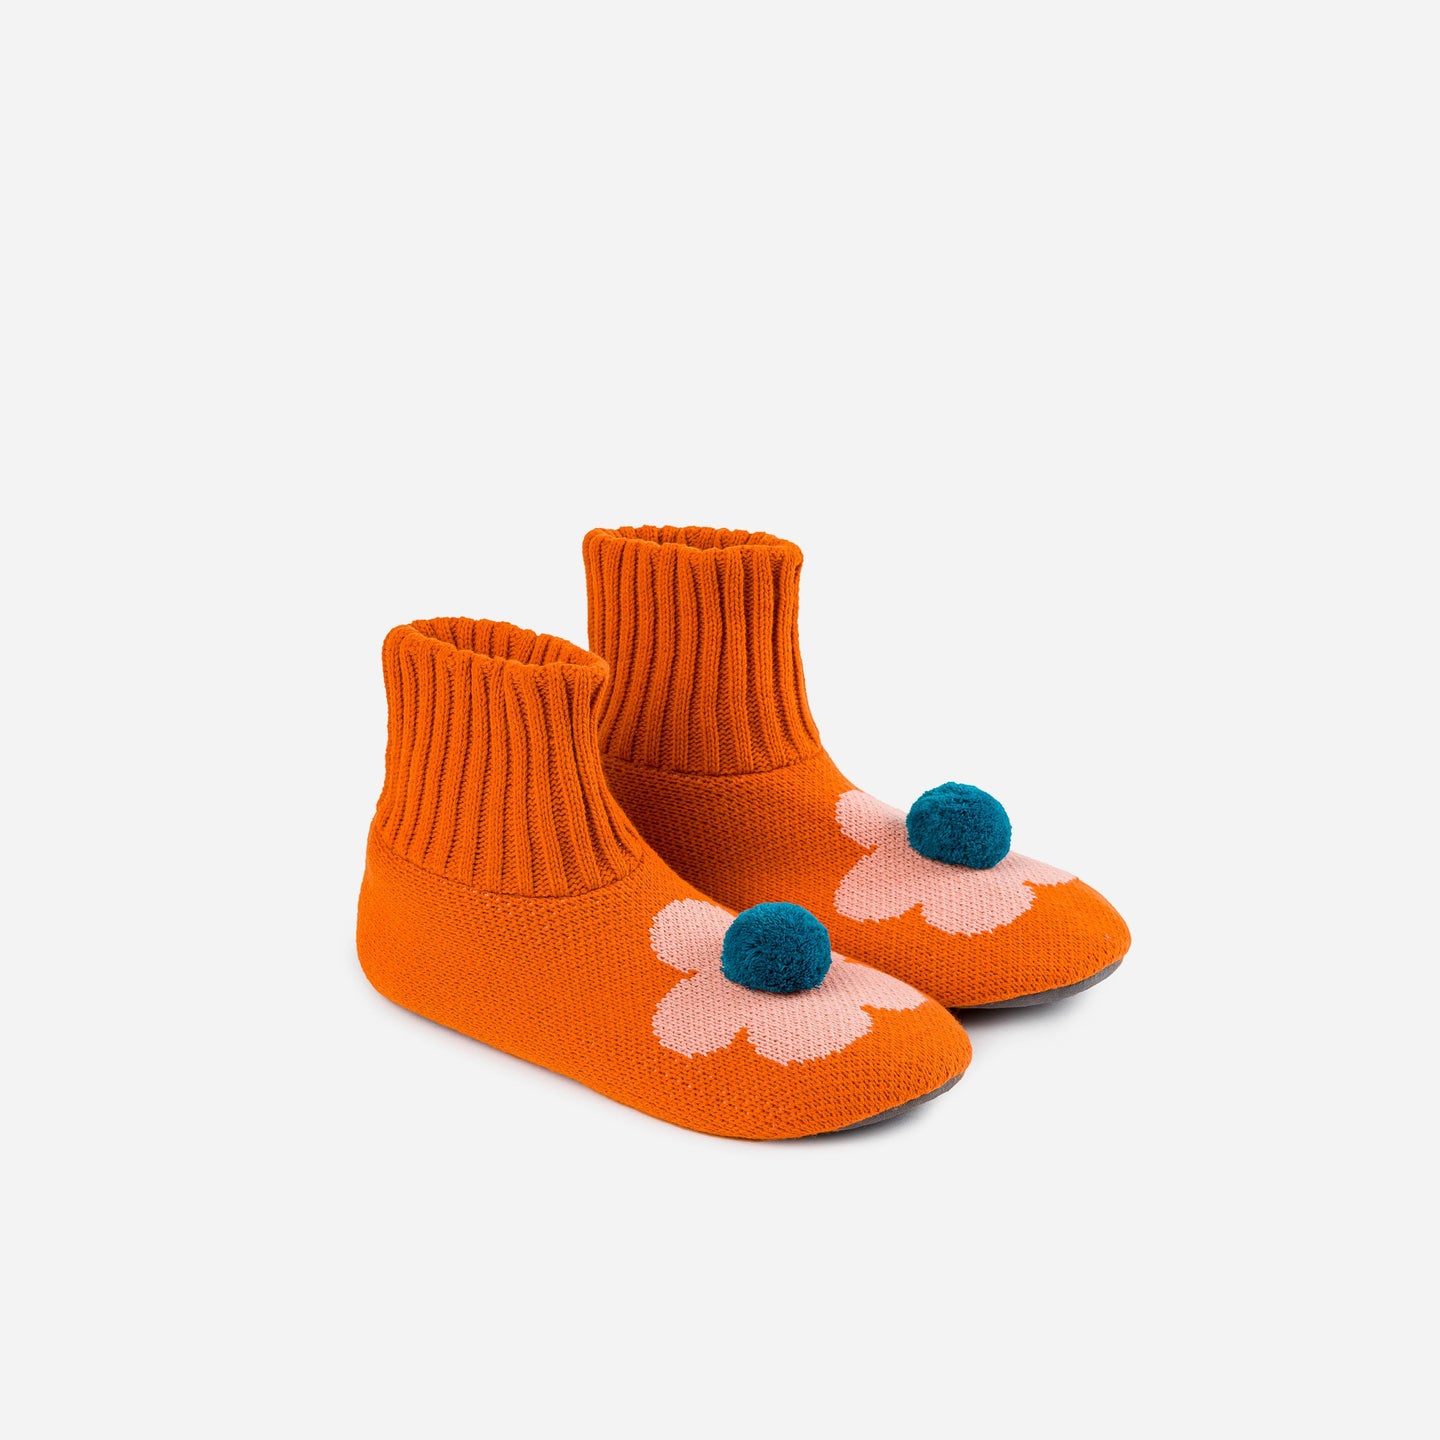 Orange non slip knit slippers with a pom on top